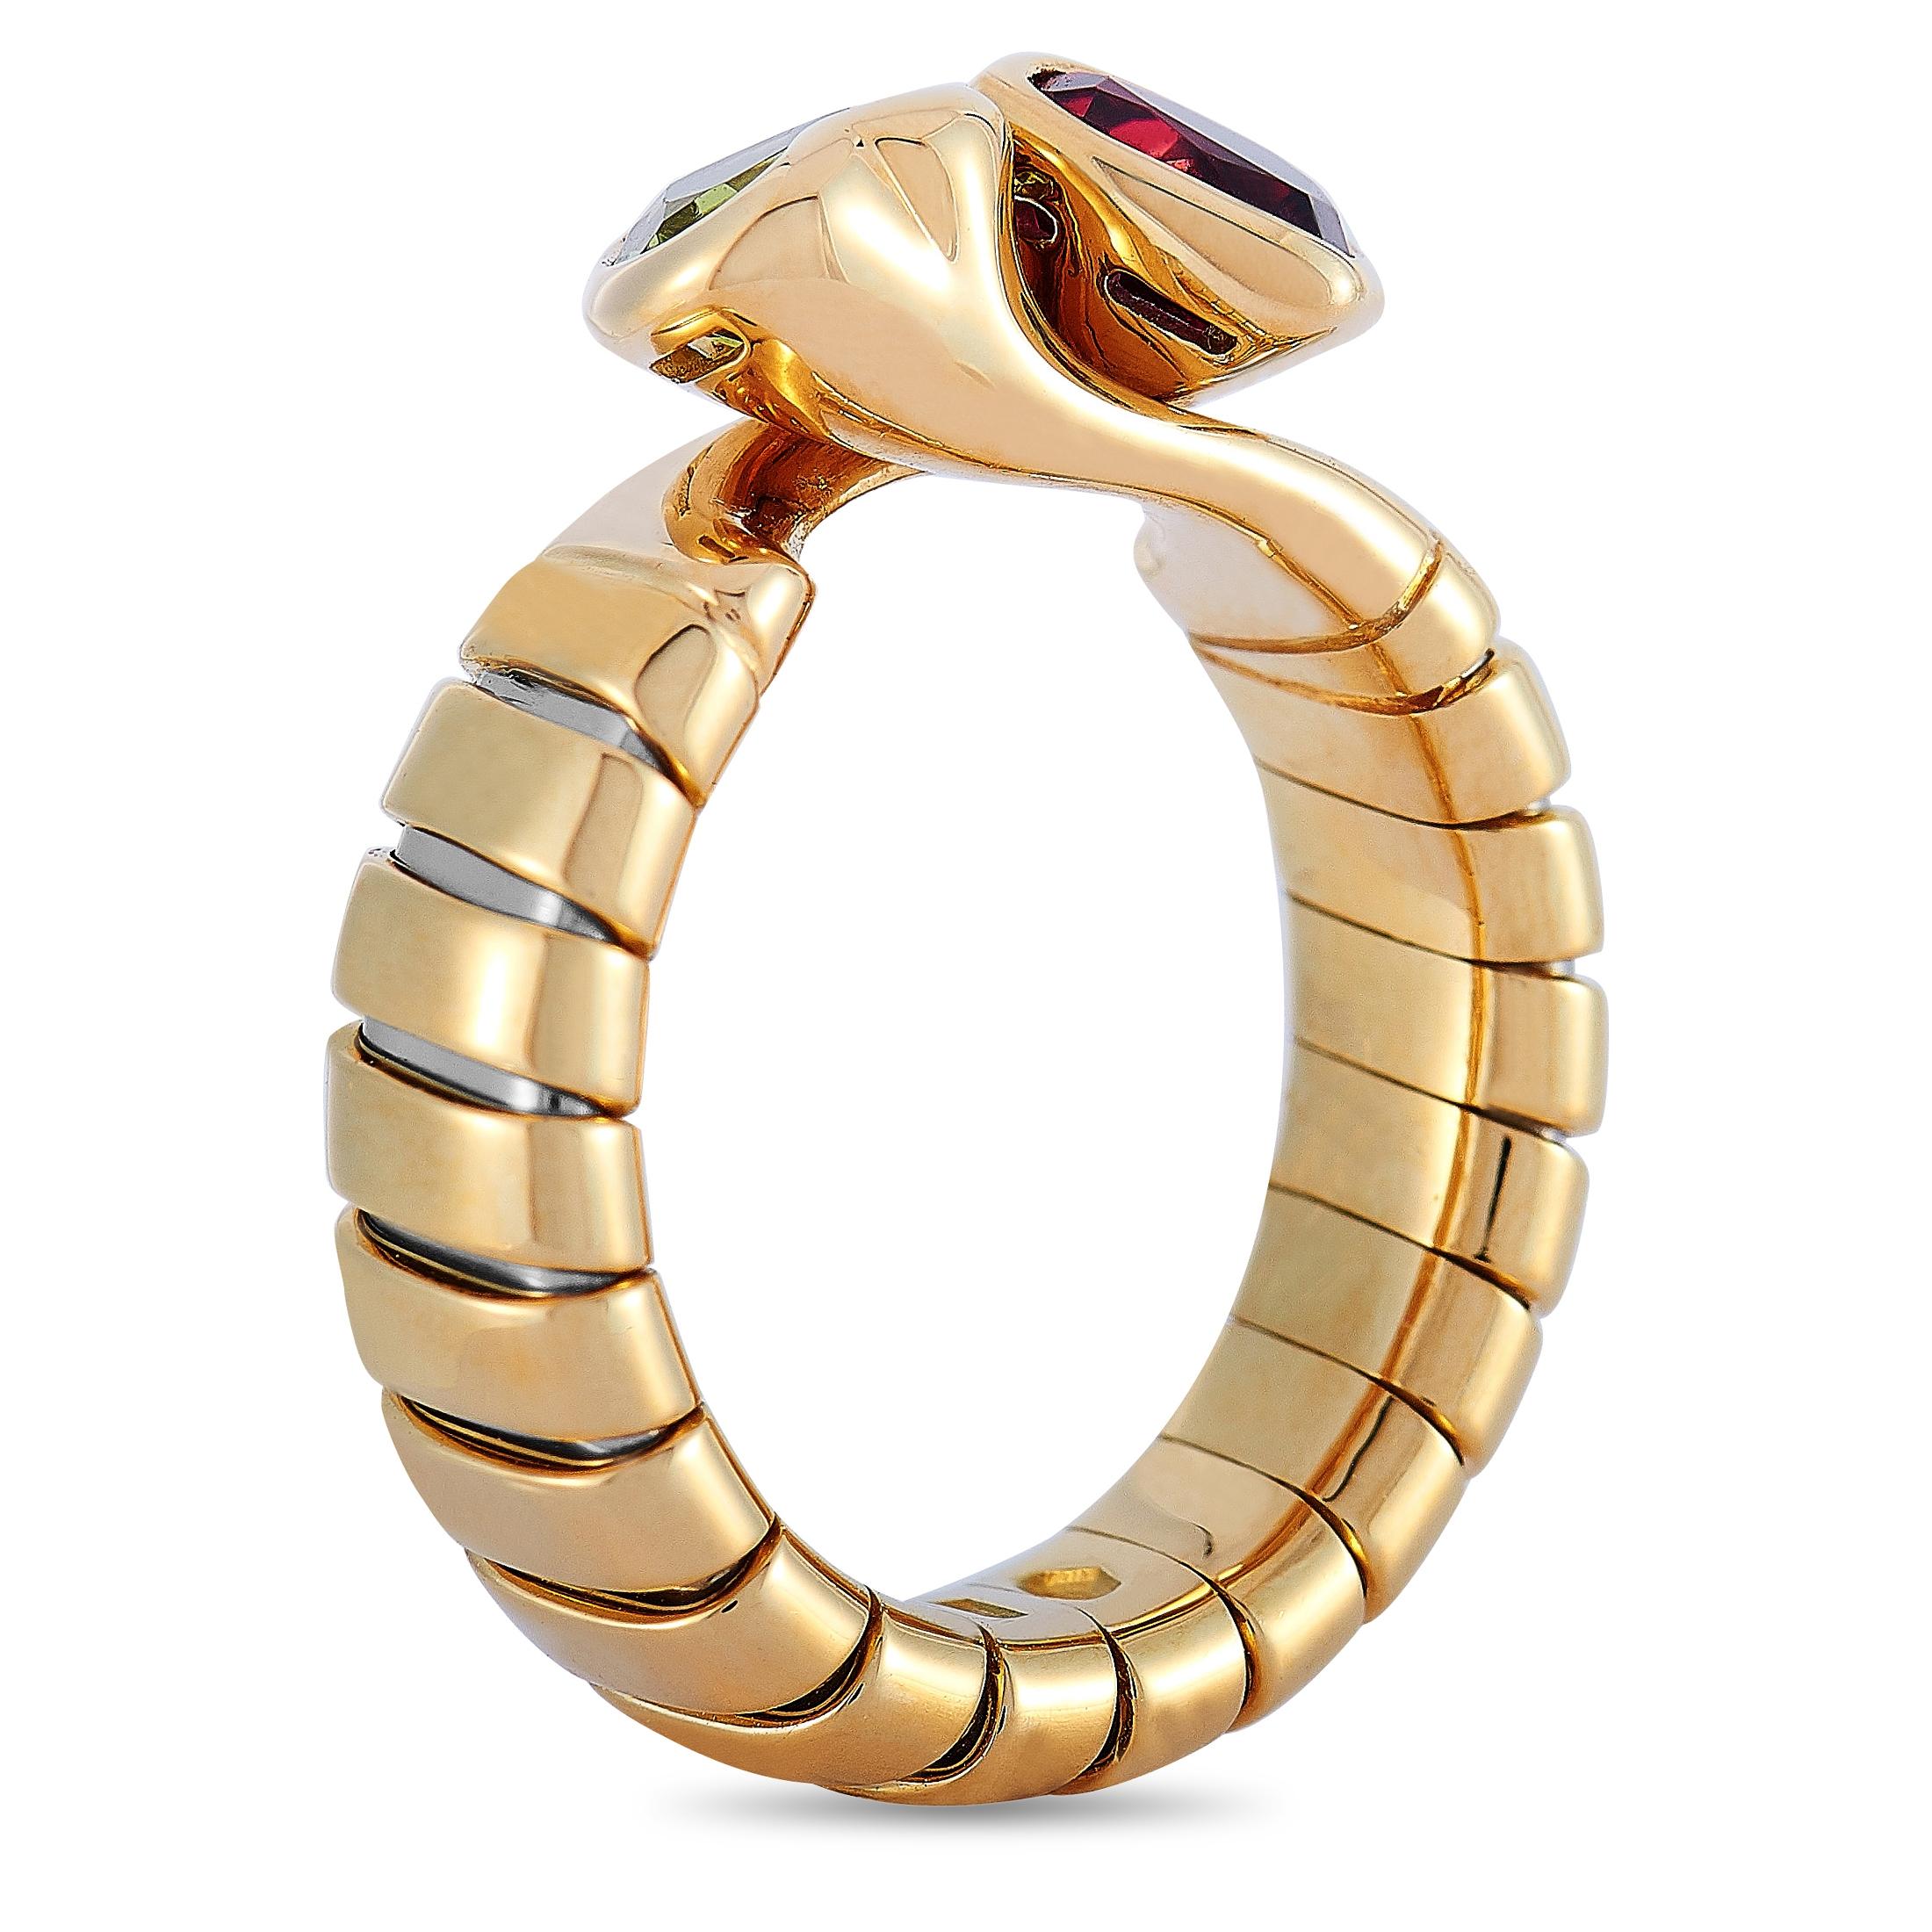 The Bvlgari “Spiga” ring is made of 18K yellow gold and embellished with a peridot and a garnet. The ring weighs 7.5 grams and boasts band thickness of 5 mm and top height of 5 mm, while top dimensions measure 12 by 9 mm.
 
 This jewelry piece is